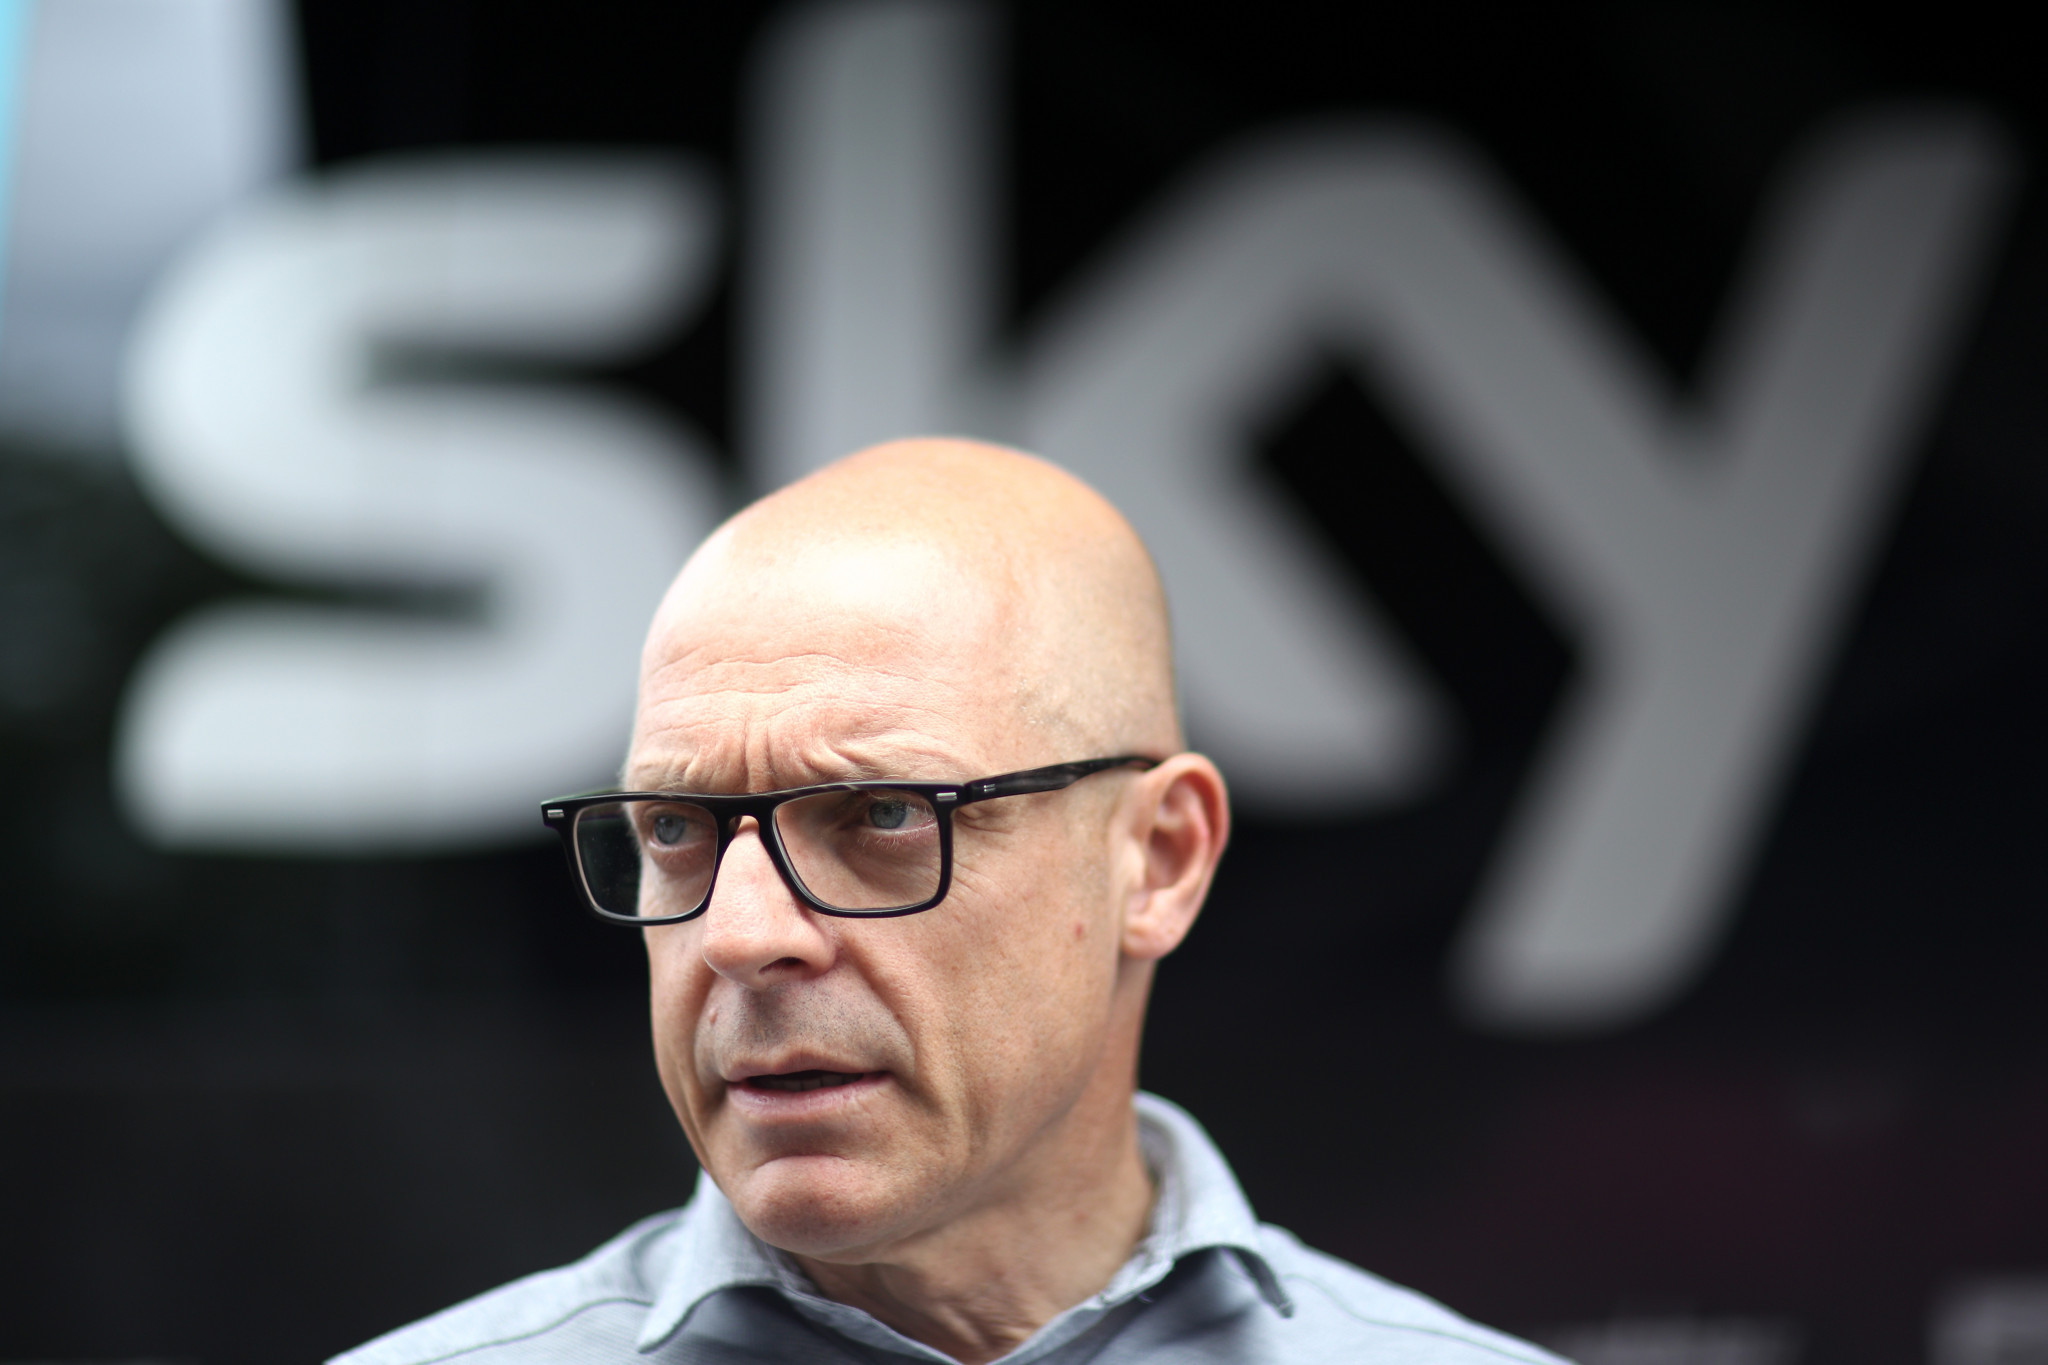 The UCI President's comments have increased the pressure on Team Sky principal Sir David Brailsford ©Getty Images